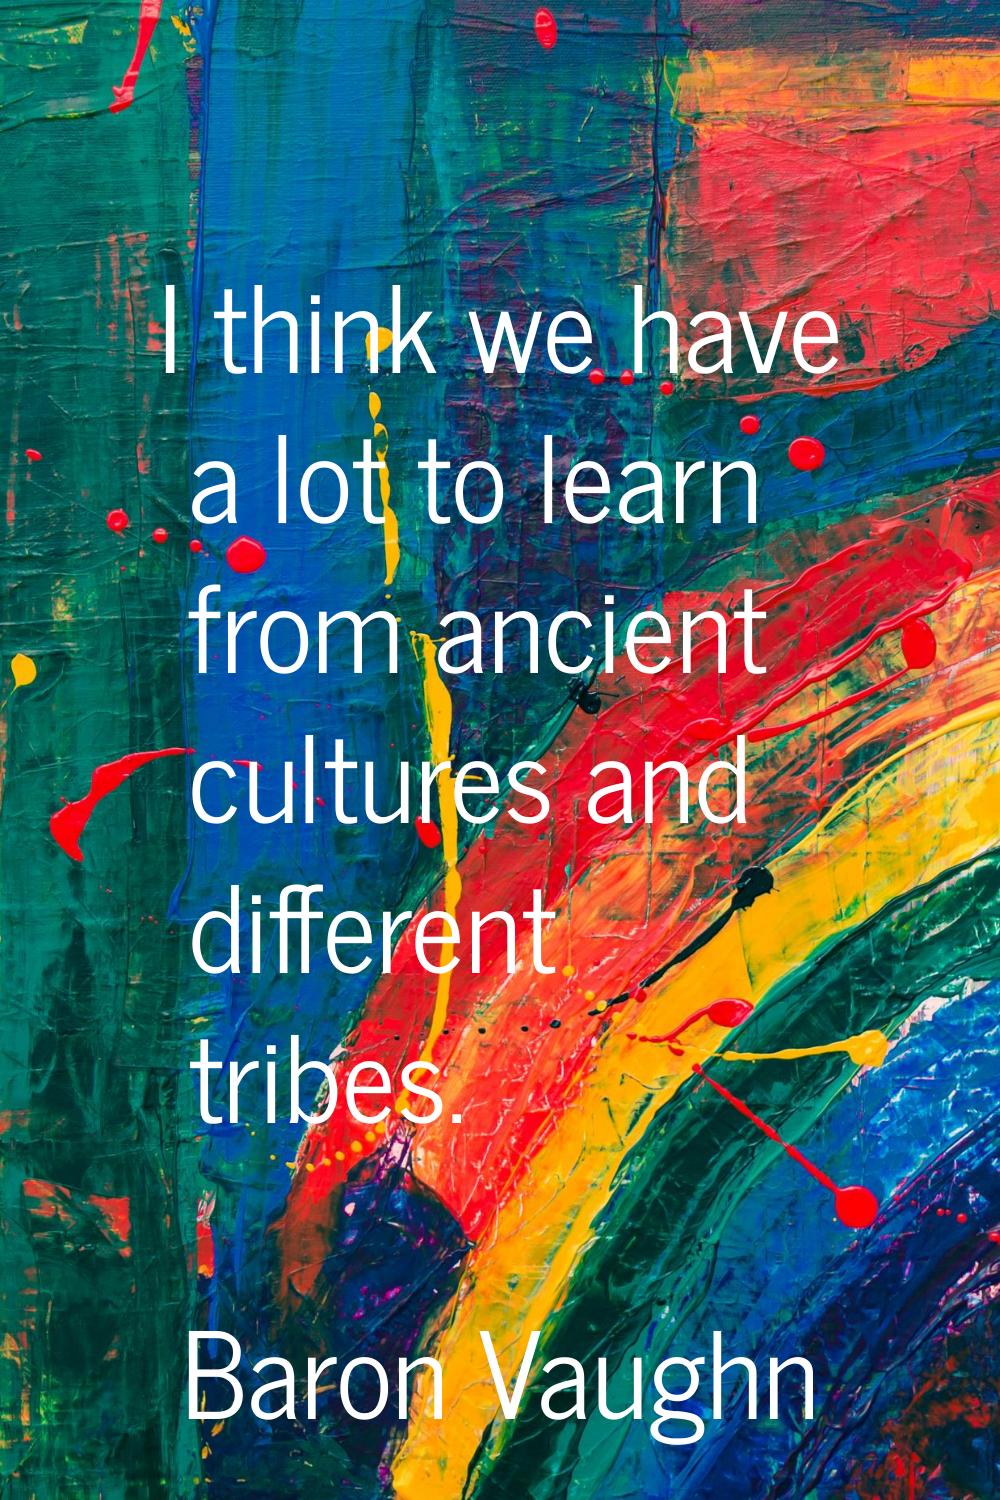 I think we have a lot to learn from ancient cultures and different tribes.